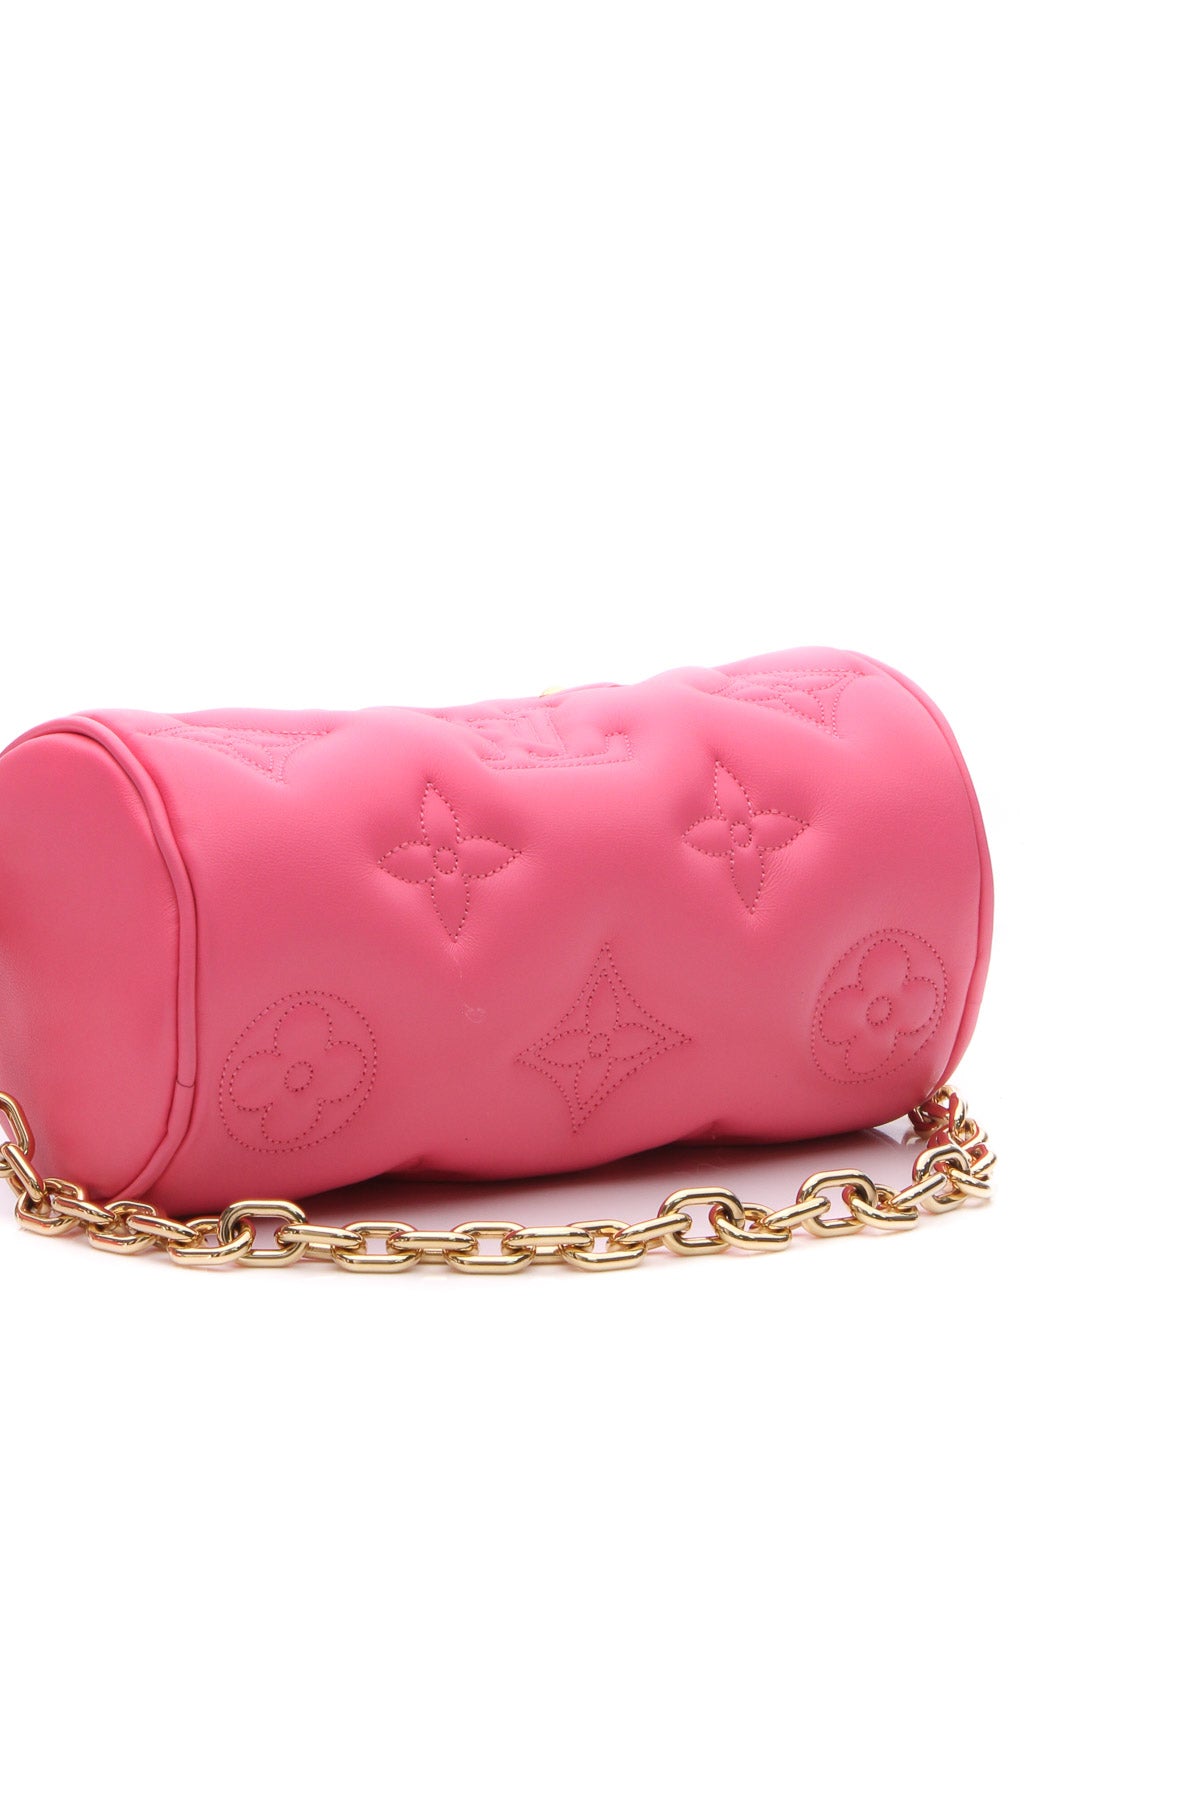 The New Louis Vuitton Bubblegram Bags Are Here To Brighten Your